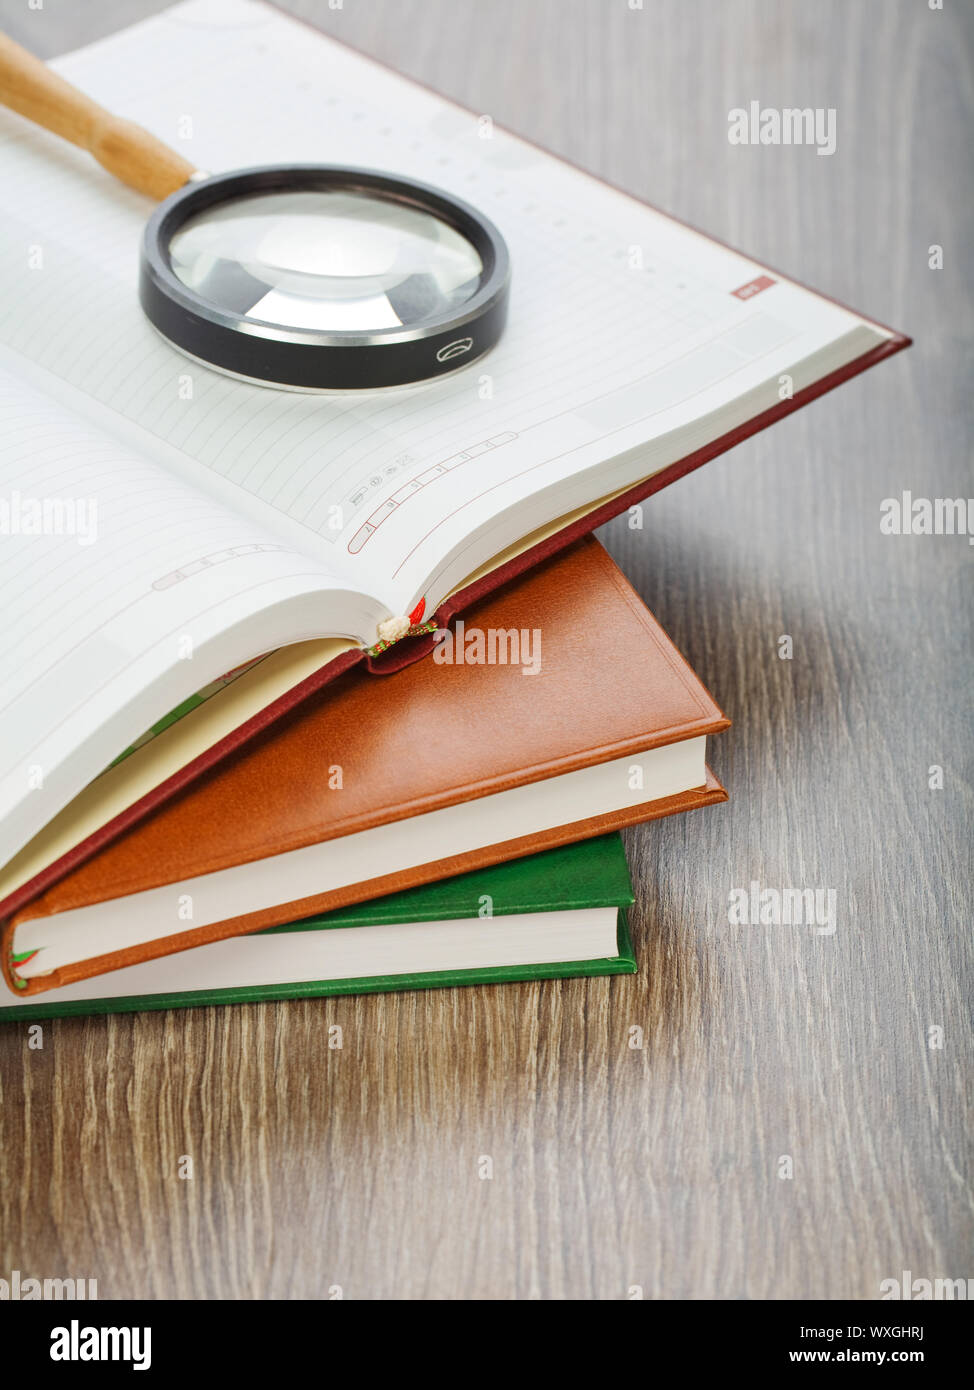 diaries and magnifier on wooden background Stock Photo